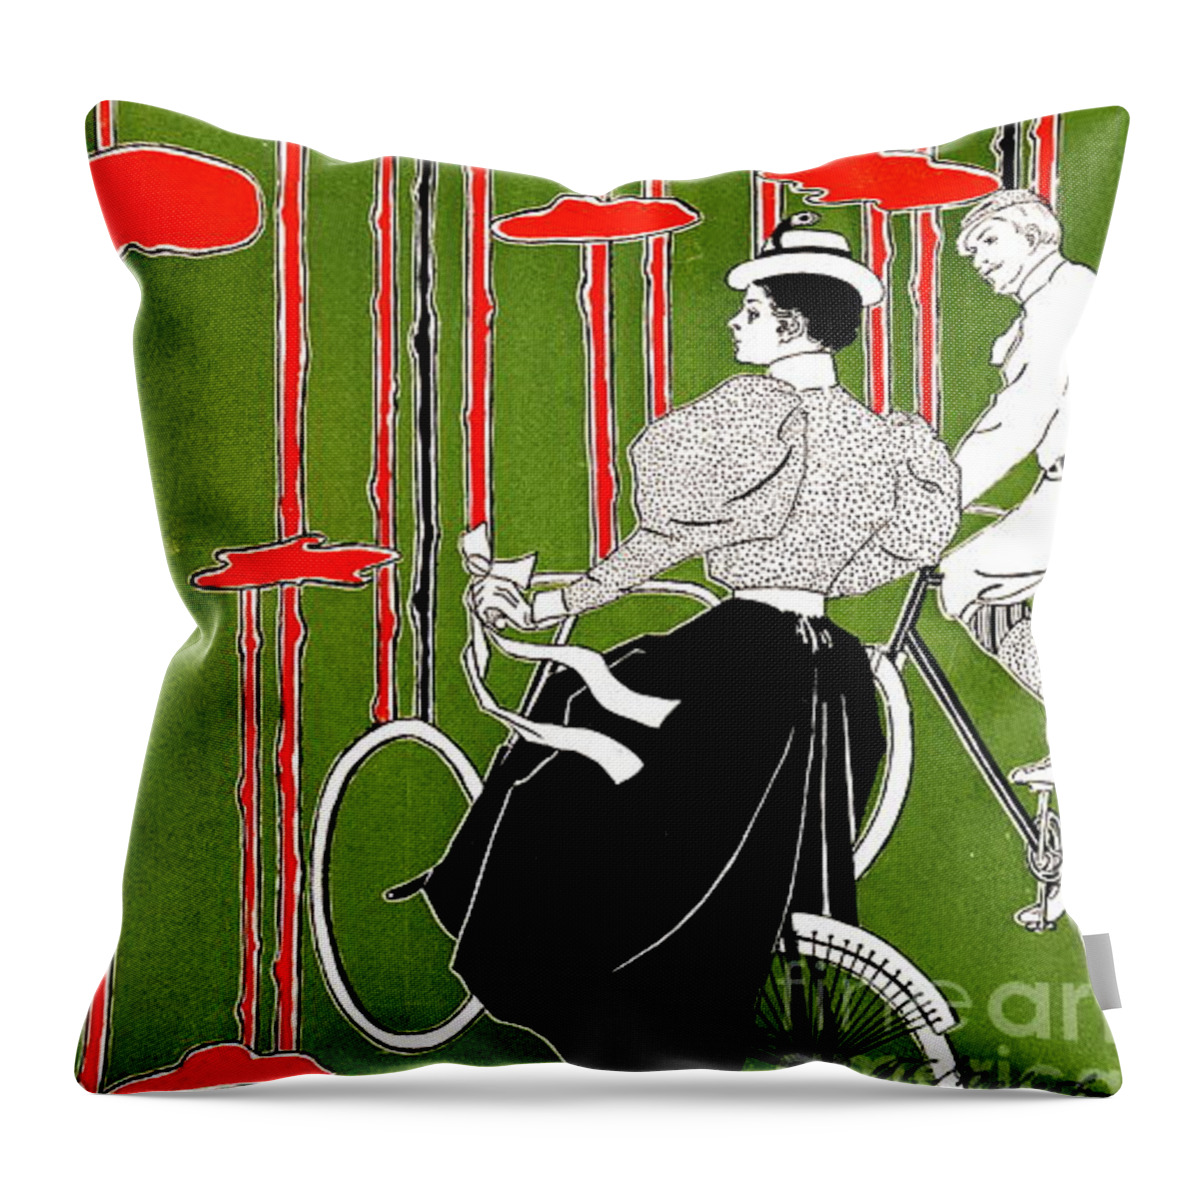 Vintage Bicycle Issue 1896 Throw Pillow featuring the photograph Vintage Bicycle Issue 1896 by Padre Art